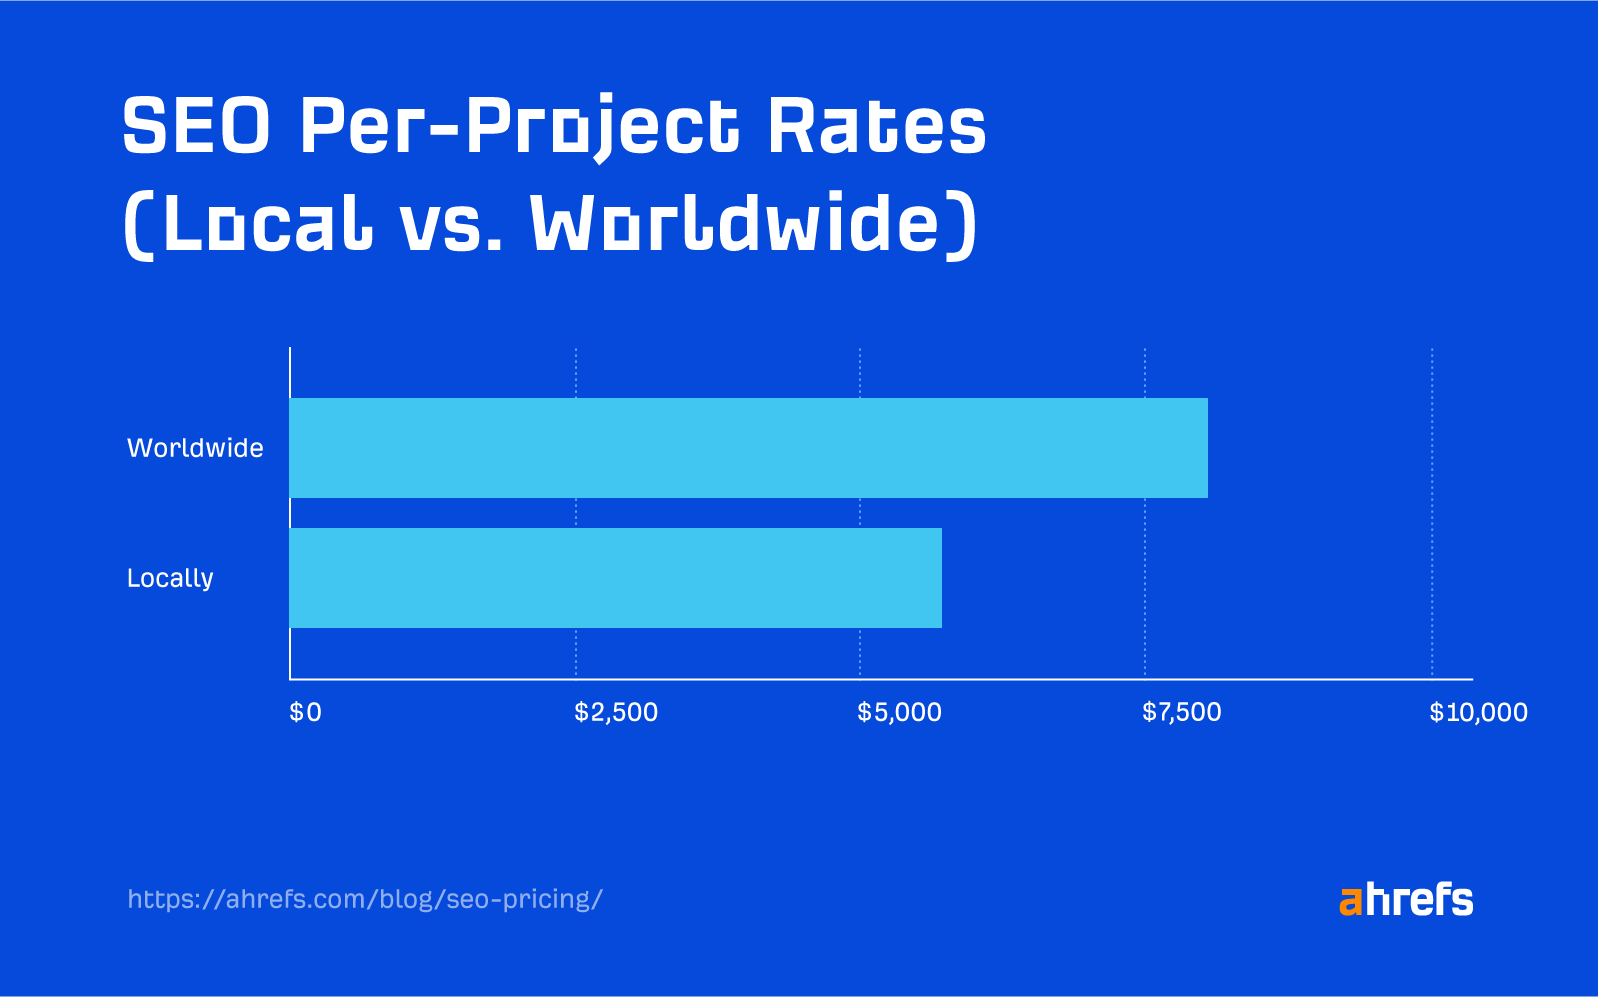 Survey results: SEO per-project rates (local vs. worldwide)